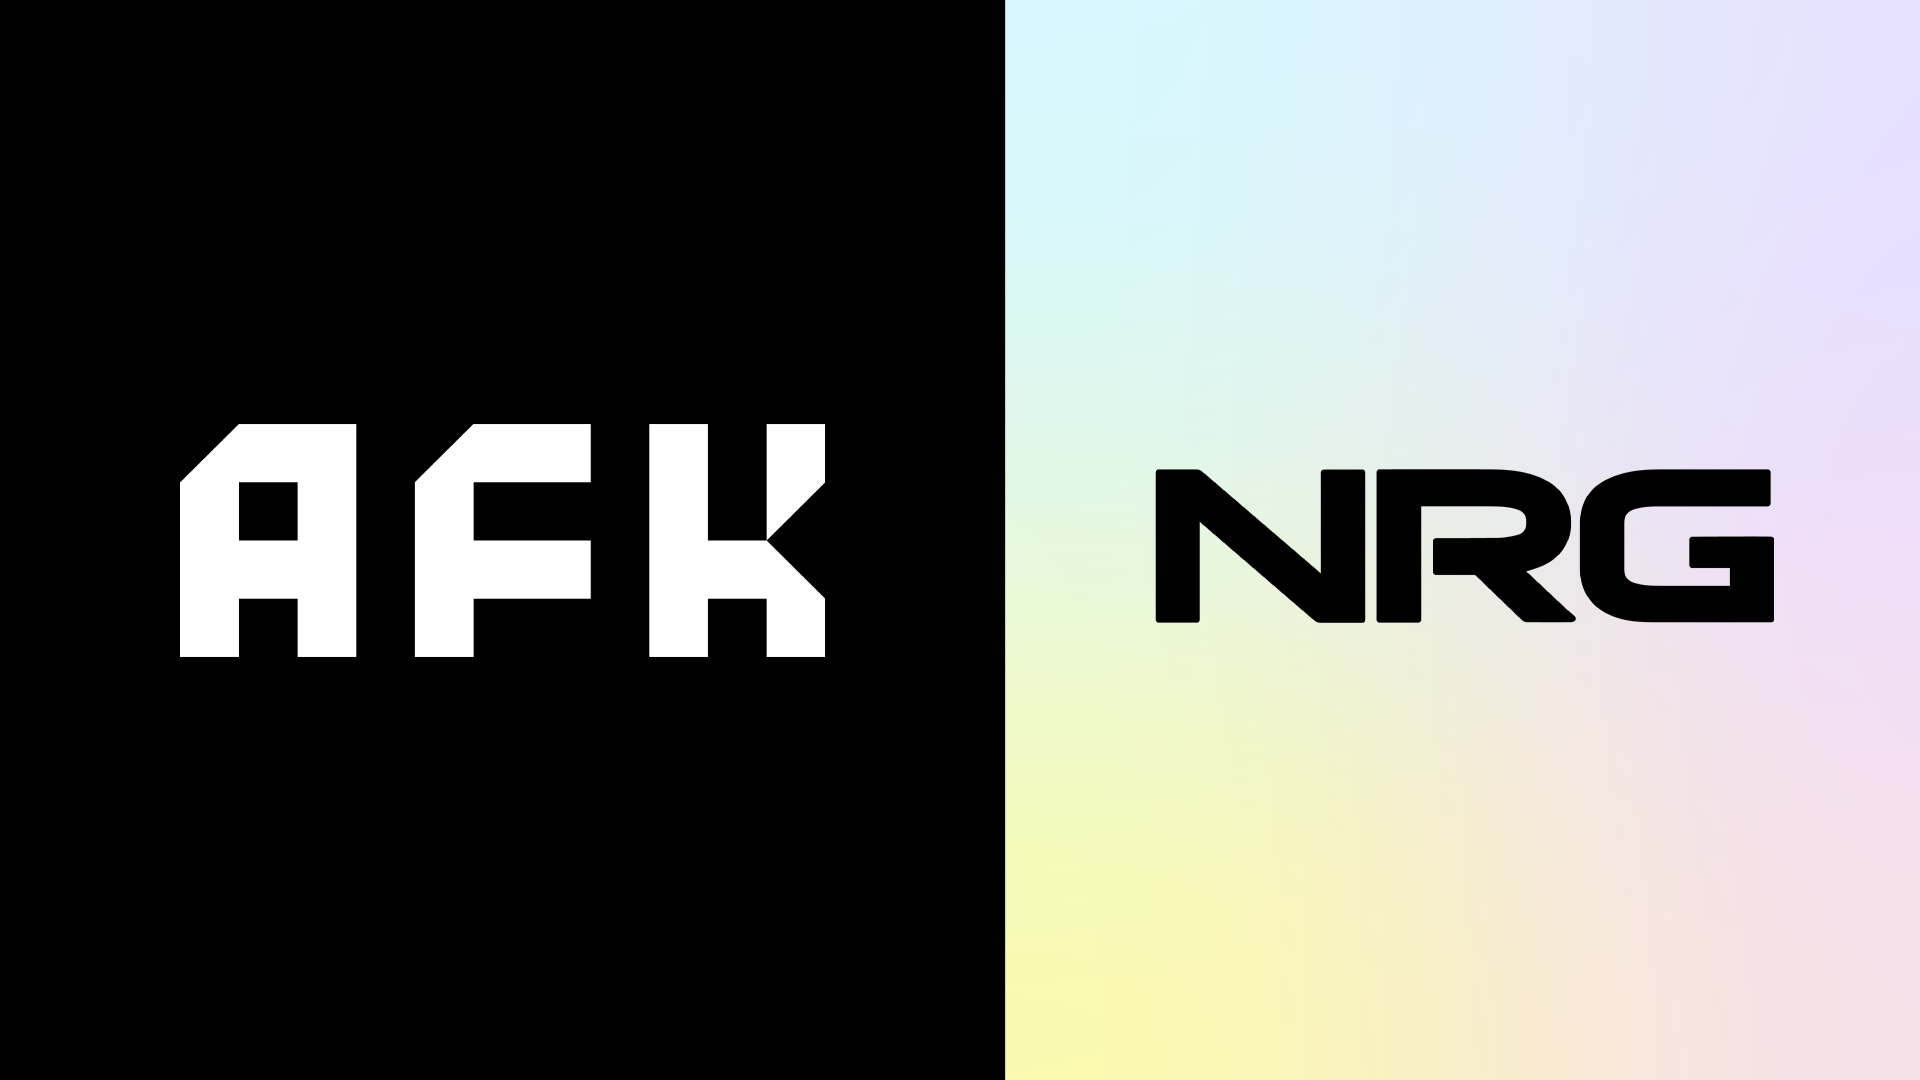 UK-headquartered agency AFK signs partnership with esports organisation NRG, says collaboration is key to solving esports’ challenges